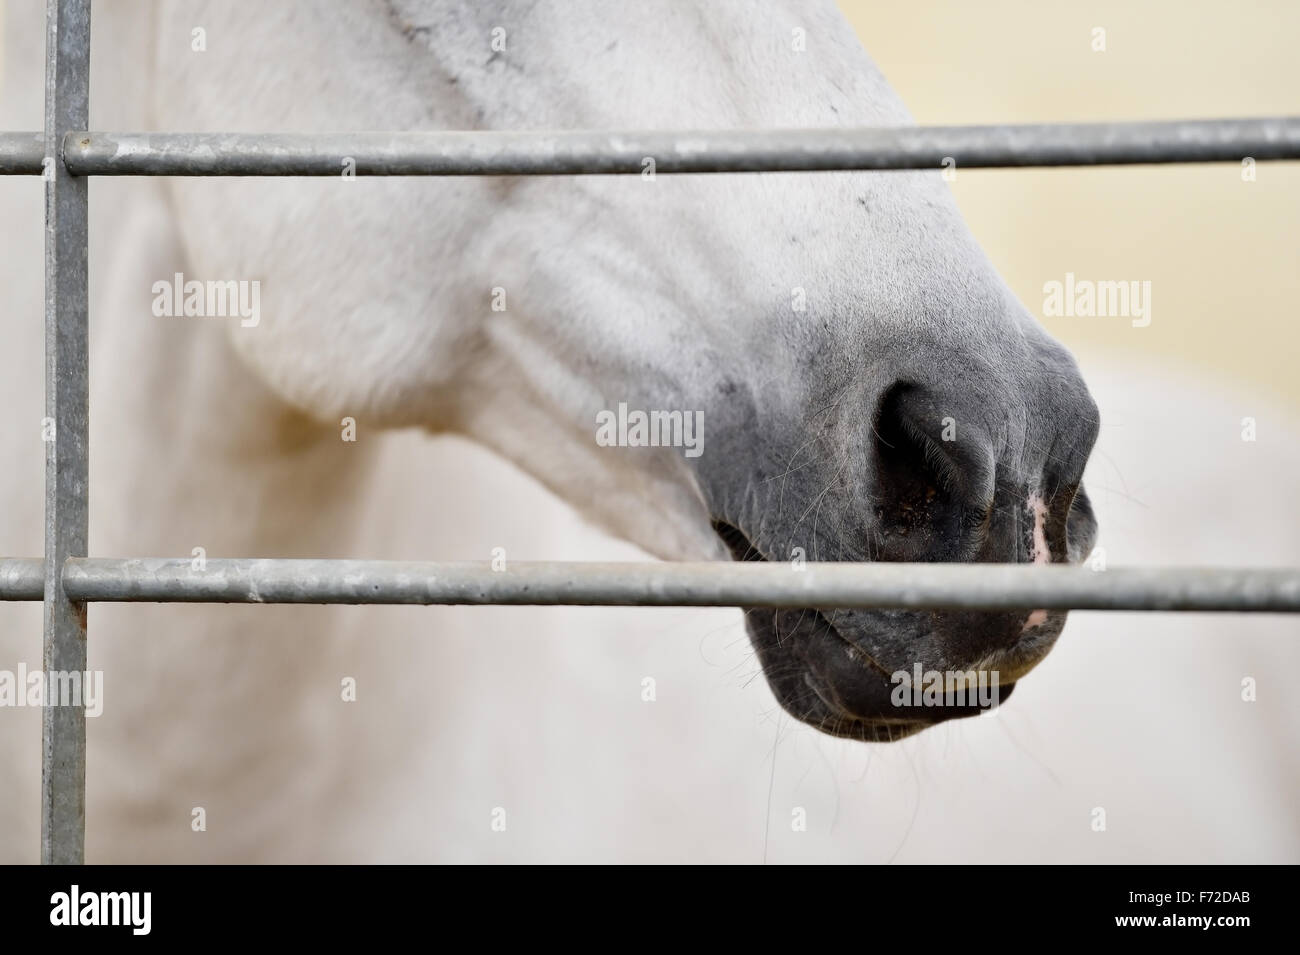 Closeup shot with the nose of a white horse inside a pen Stock Photo